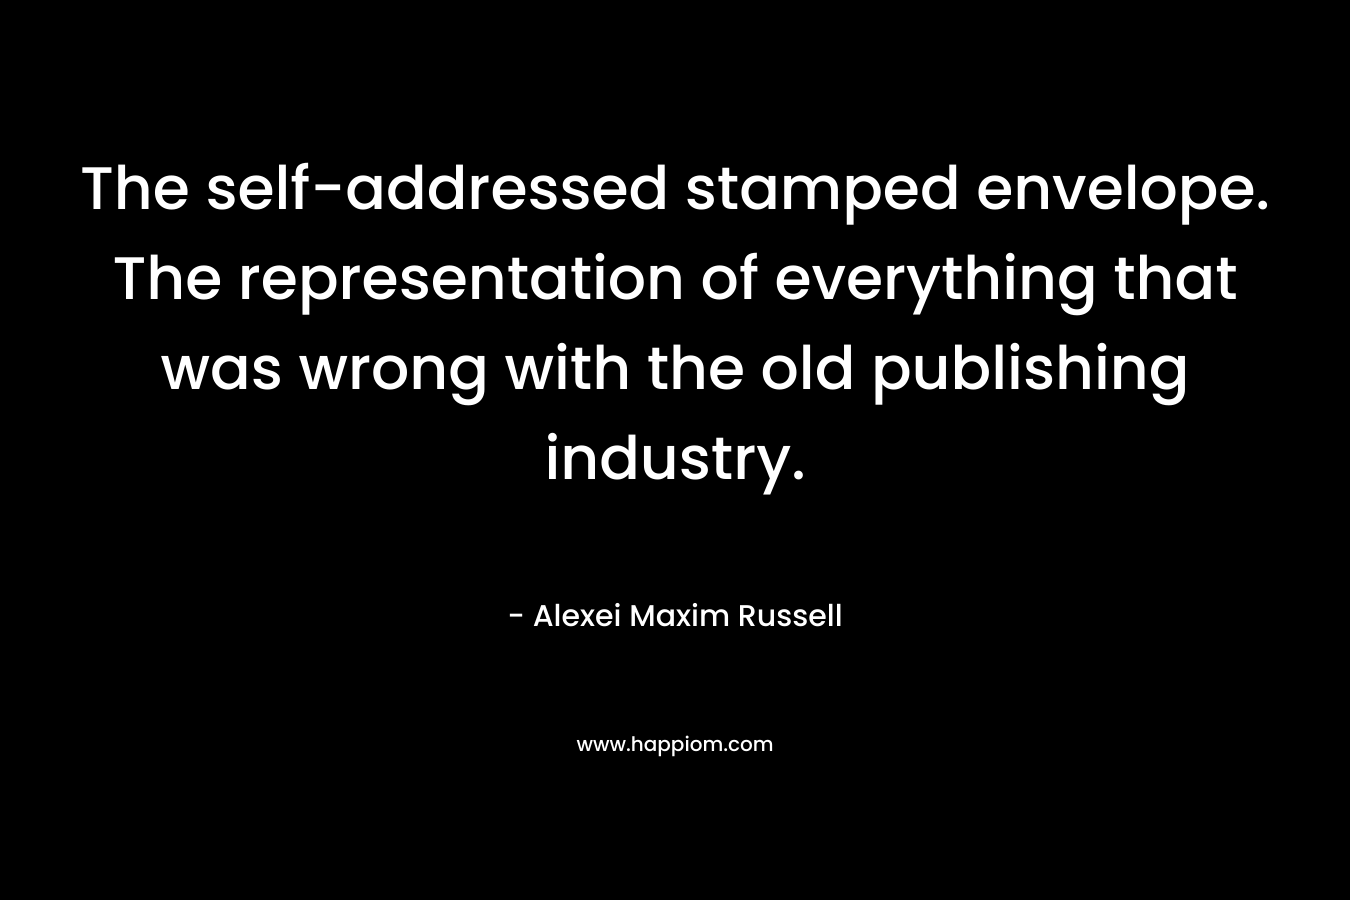 The self-addressed stamped envelope. The representation of everything that was wrong with the old publishing industry. – Alexei Maxim Russell